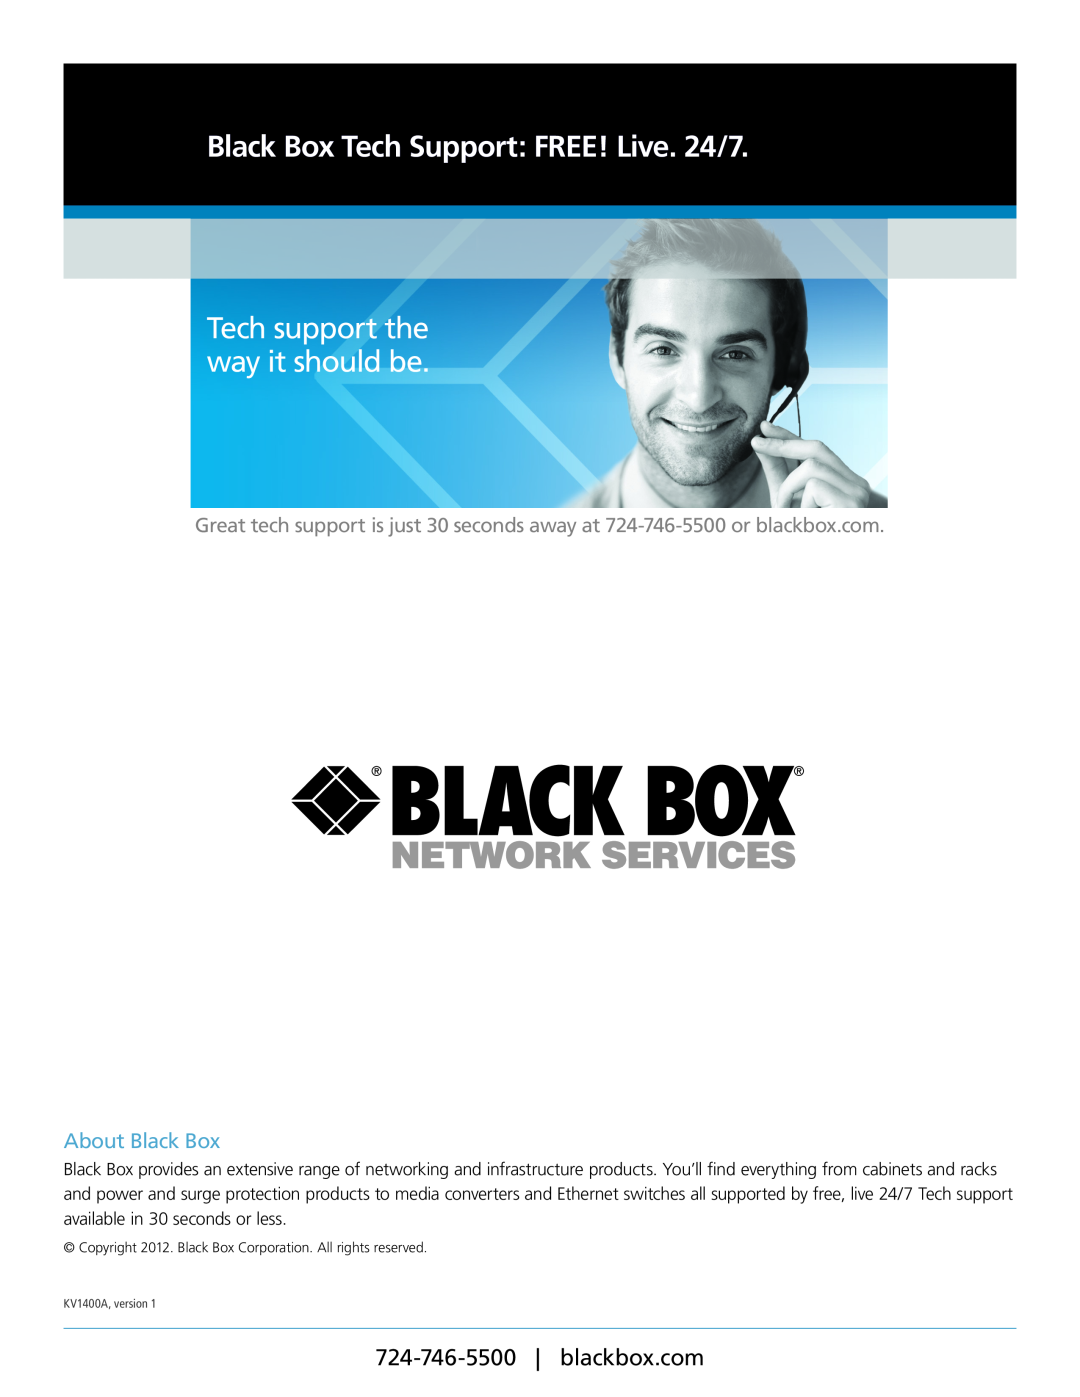 Black Box KV1401A, KV1405A Black Box Tech Support FREE! Live. 24/7, Tech support the way it should be, About Black Box 